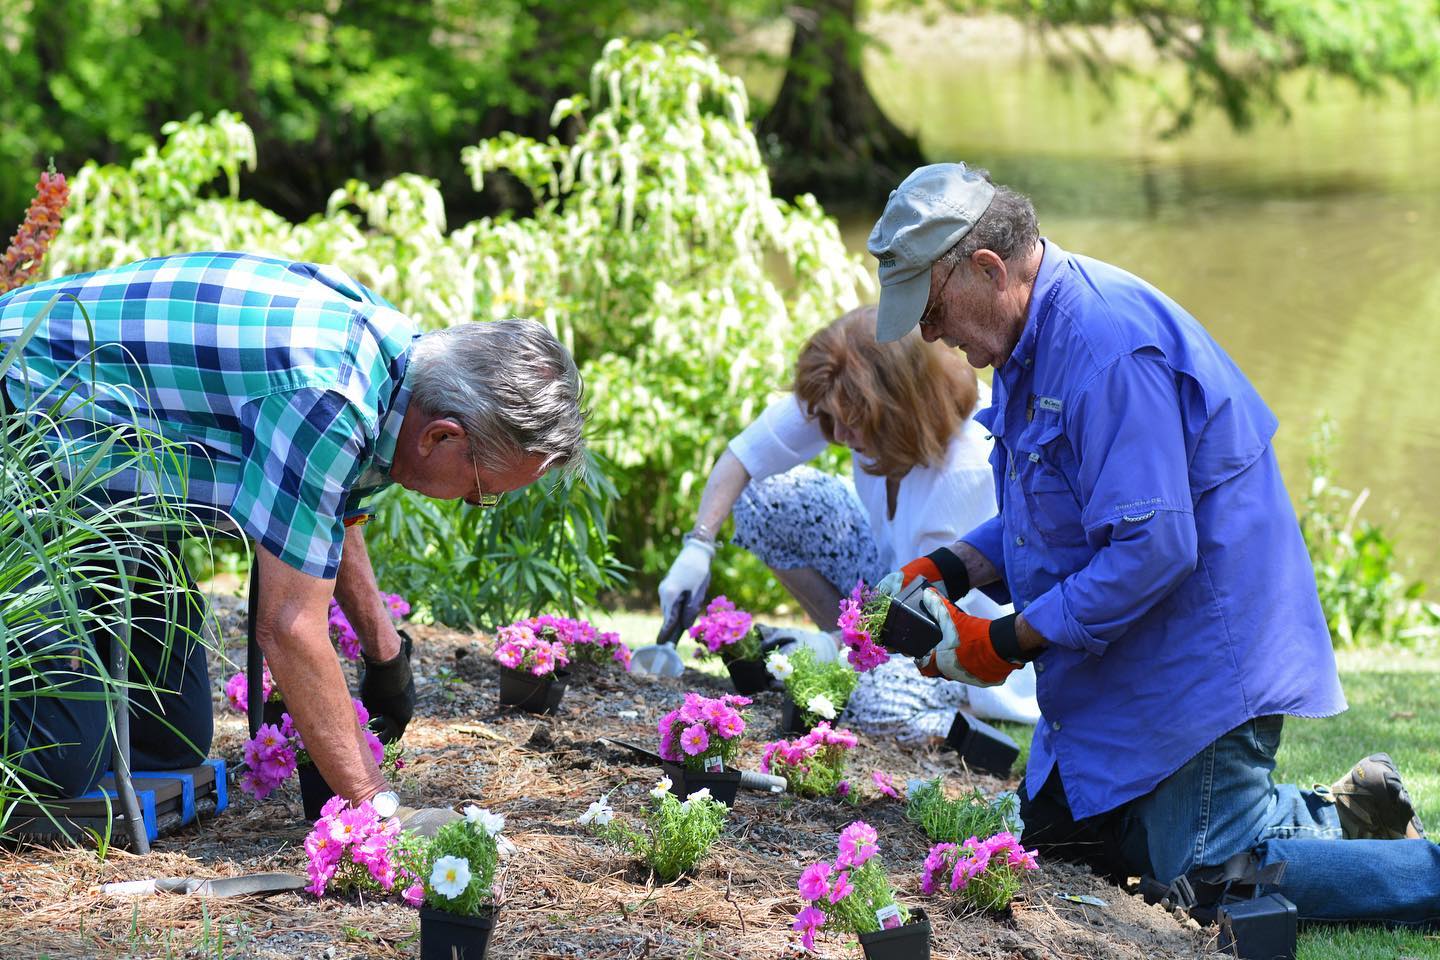 Therapeutic horticulture with veterans